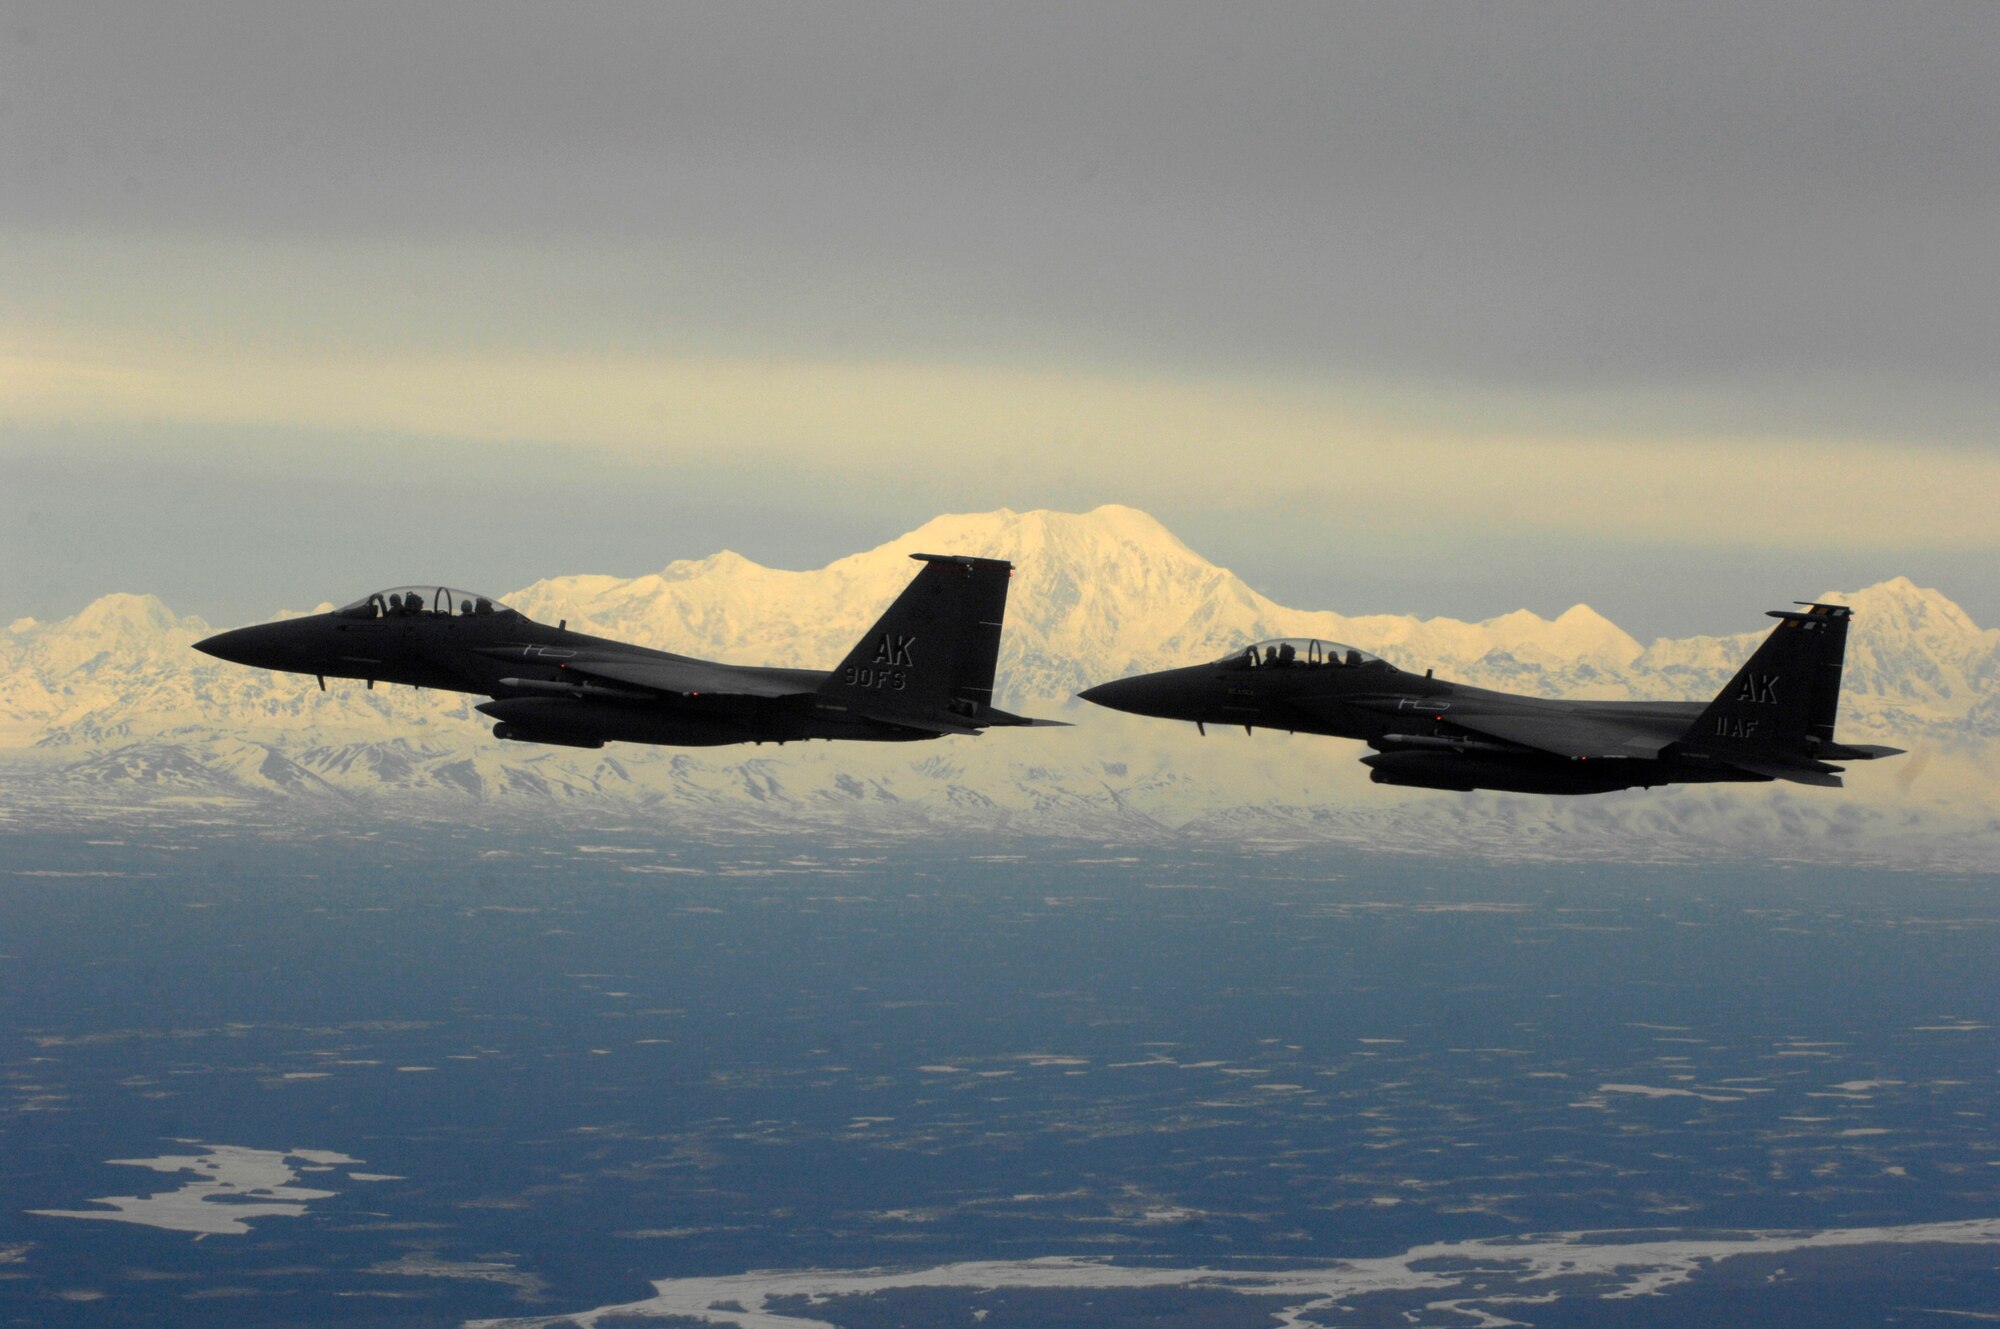 OVER ALASKA -- Two F-15E Strike Eagles head back to Elmendorf Air Force Base, Alaska, with Mount McKinley and the rest of the Alaska Mountain Range in the background. (U.S. Air Force photo by Tech. Sgt. Keith Brown)